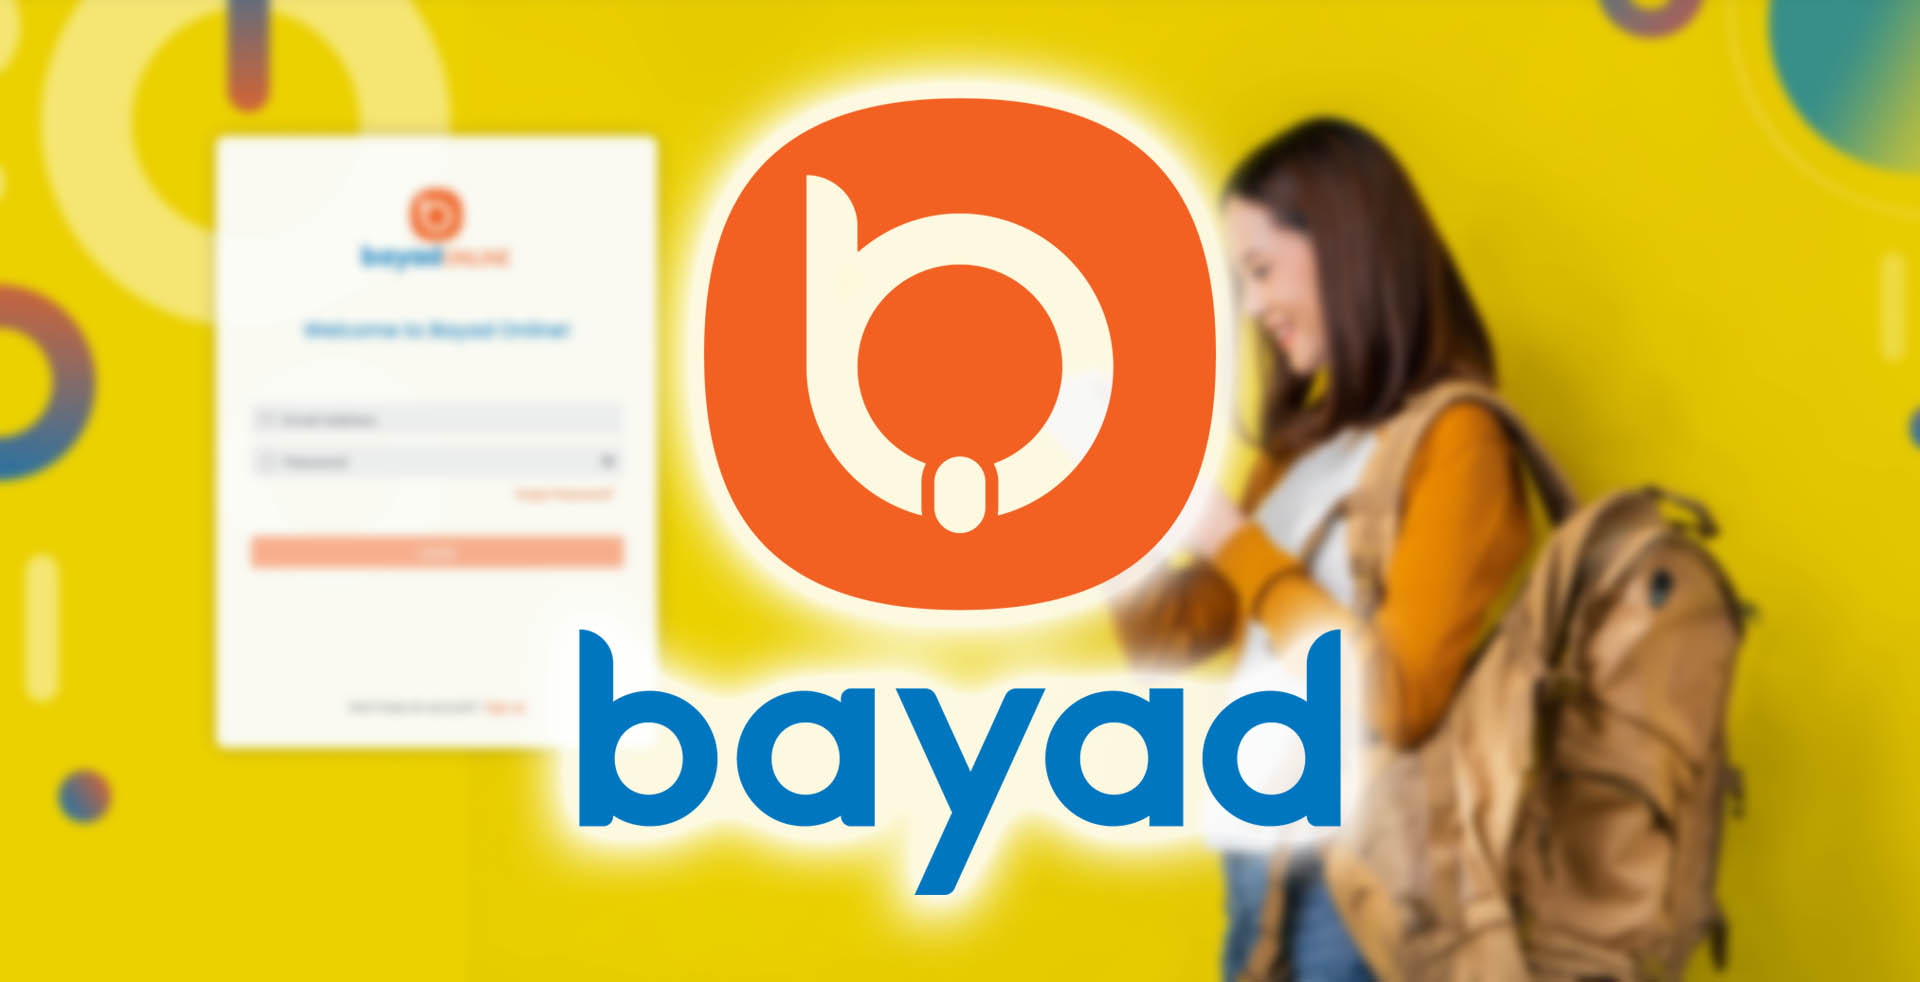 Bayad trains educators and students to become smart and responsible money managers